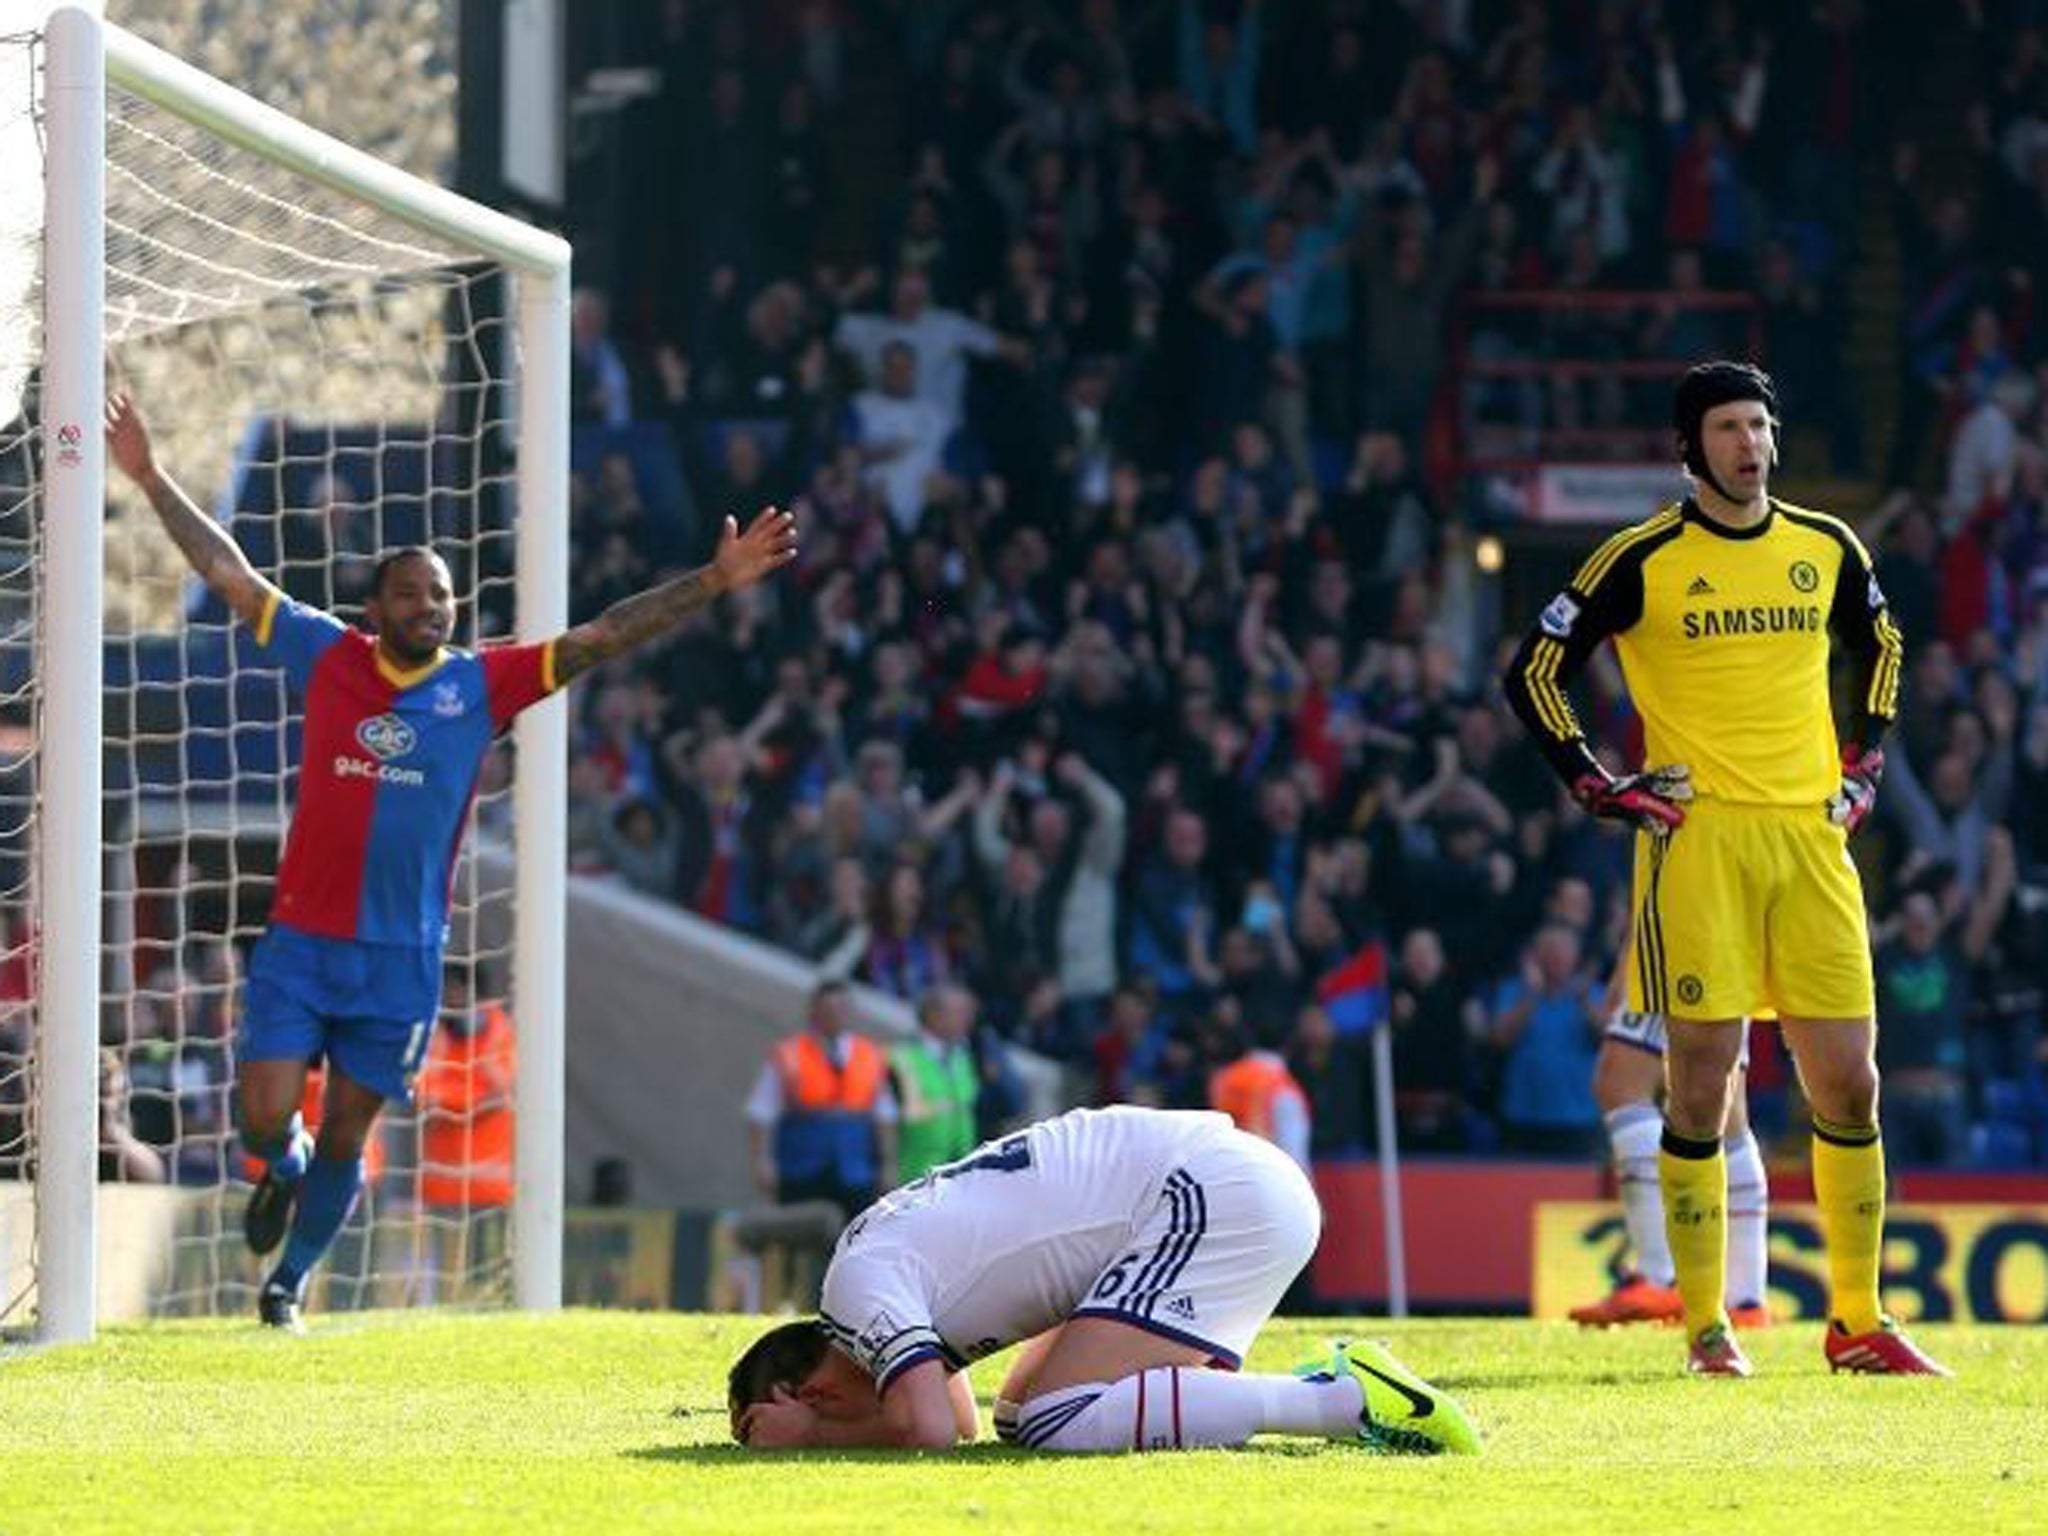 A dejected John Terry reacts after scoring an own goal in the Chelsea defeat to Palace